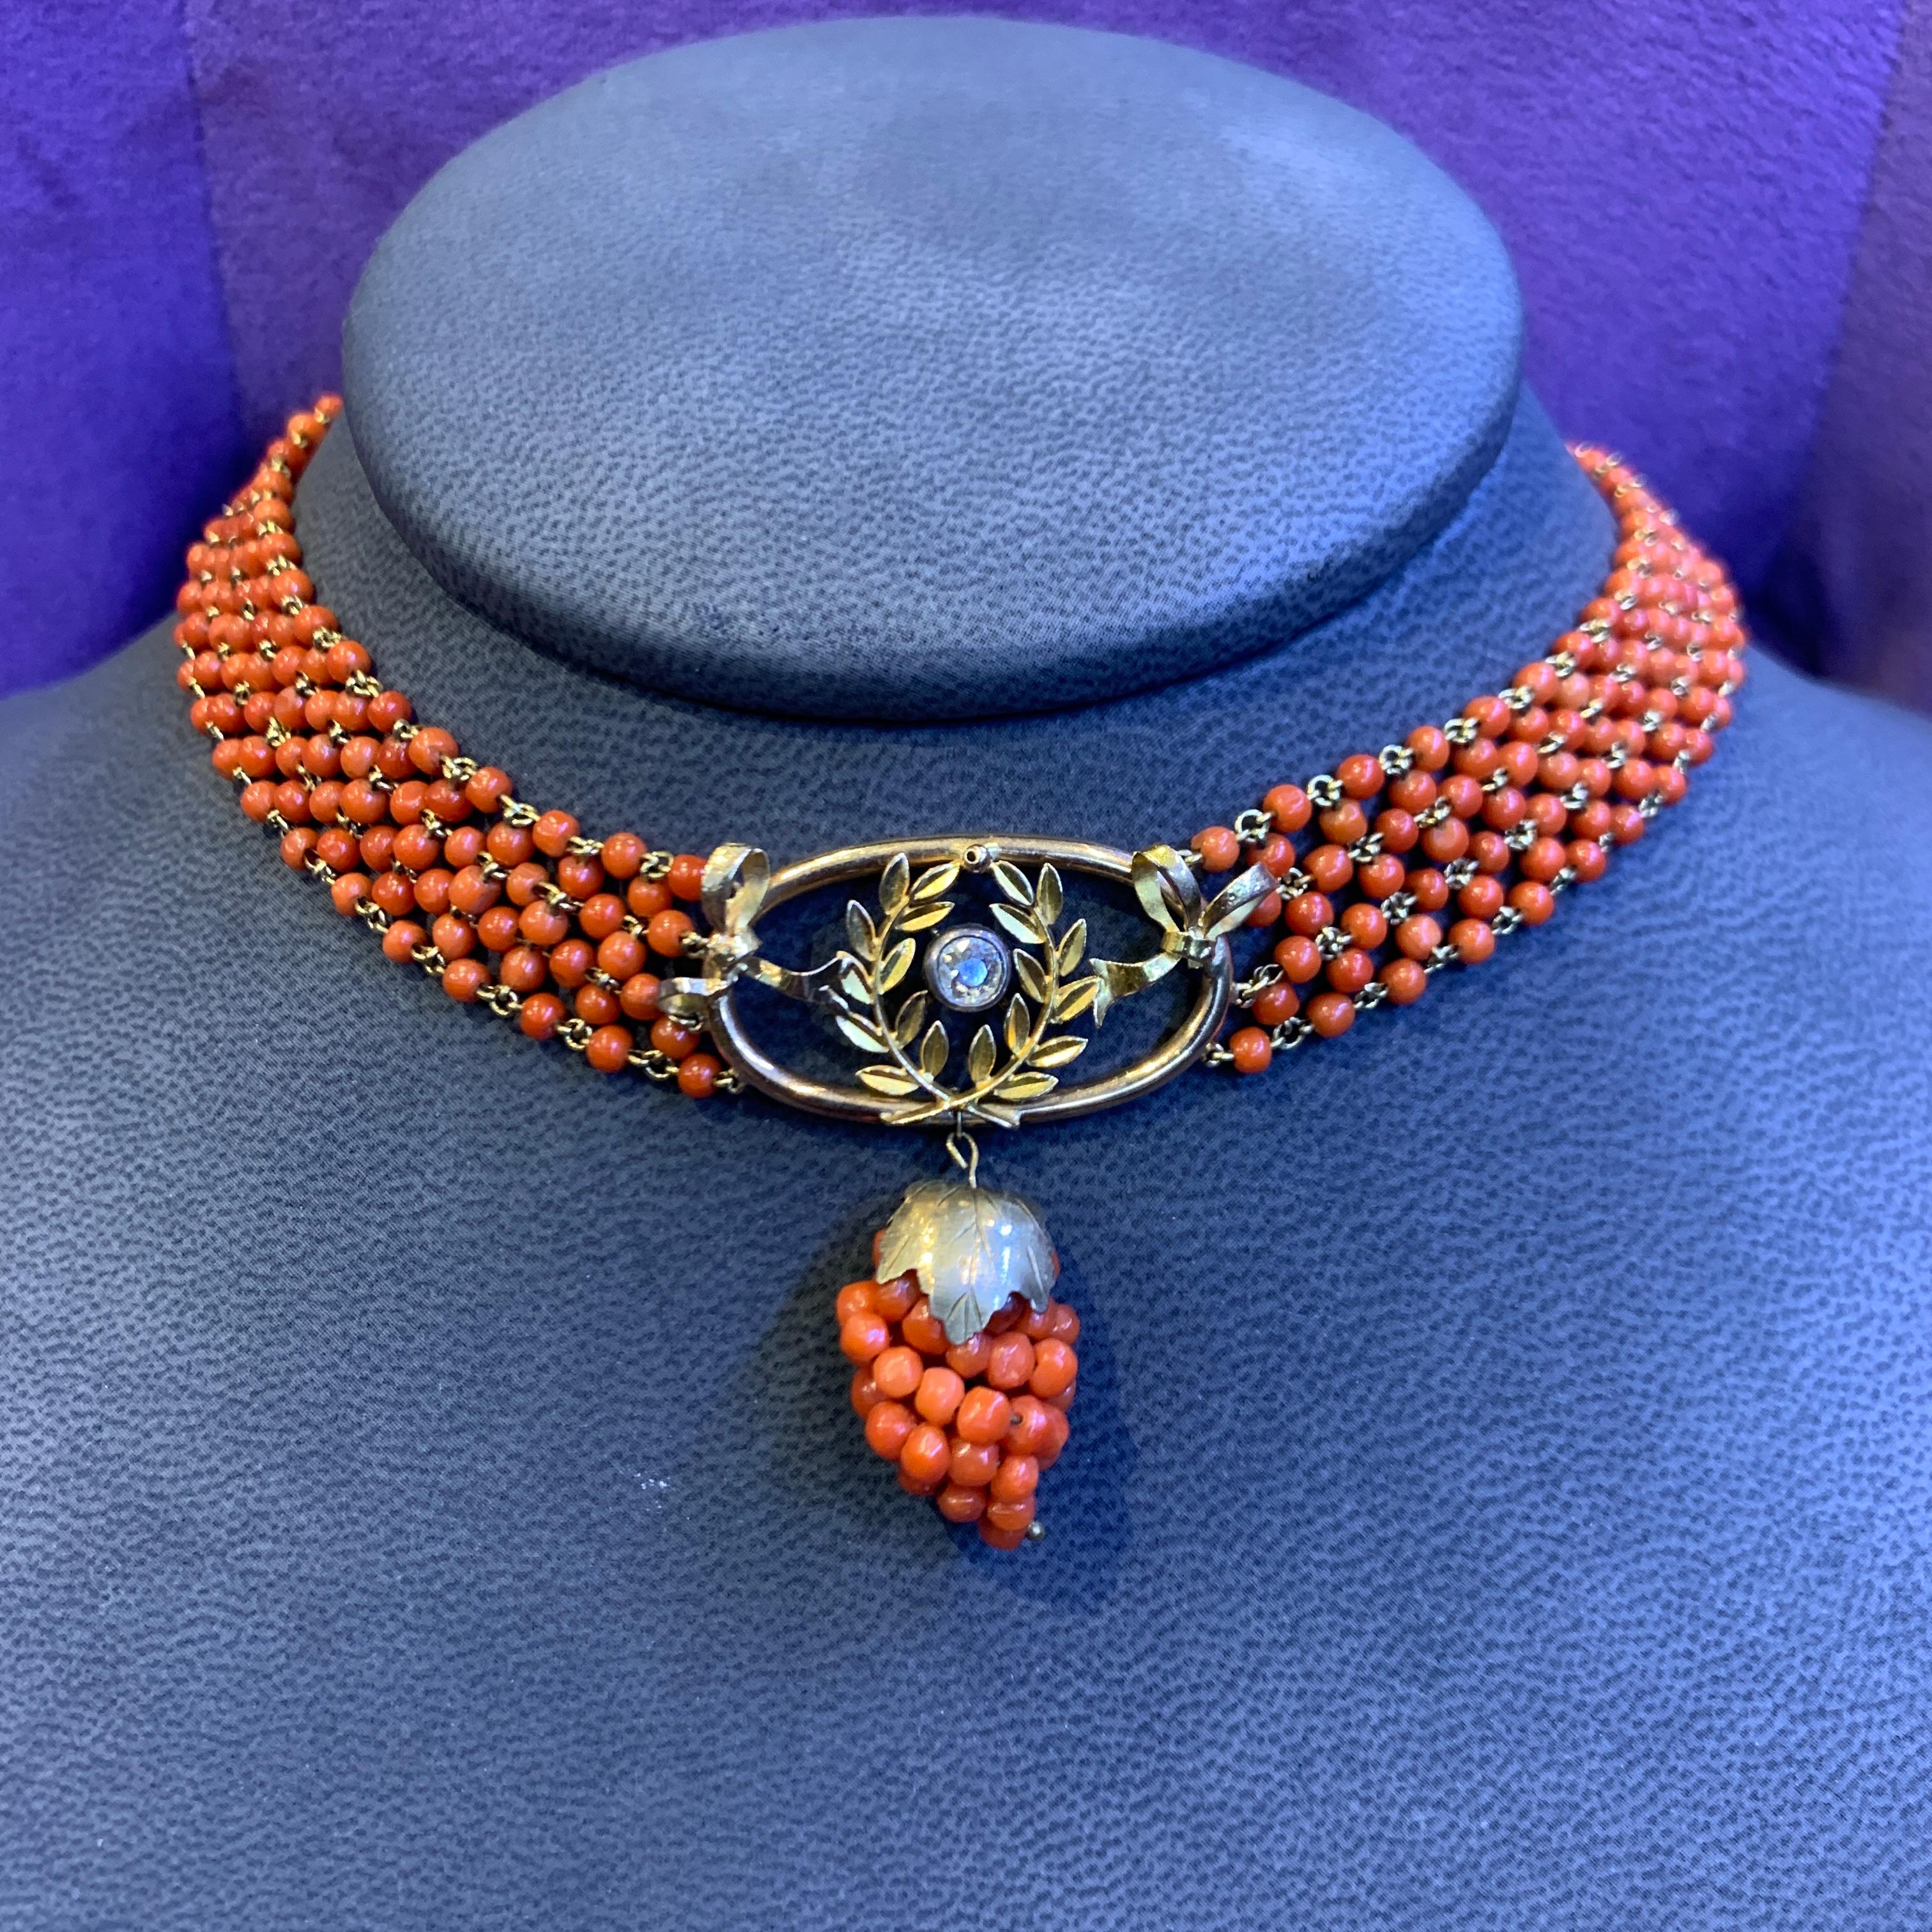 Antique Coral Choker Necklace.

A coral choker composed of coral beads that are elegantly connected by gold links. This piece also features a gold oval and wreath design, adorned with a dazzling round center diamond The pendant is further enhanced